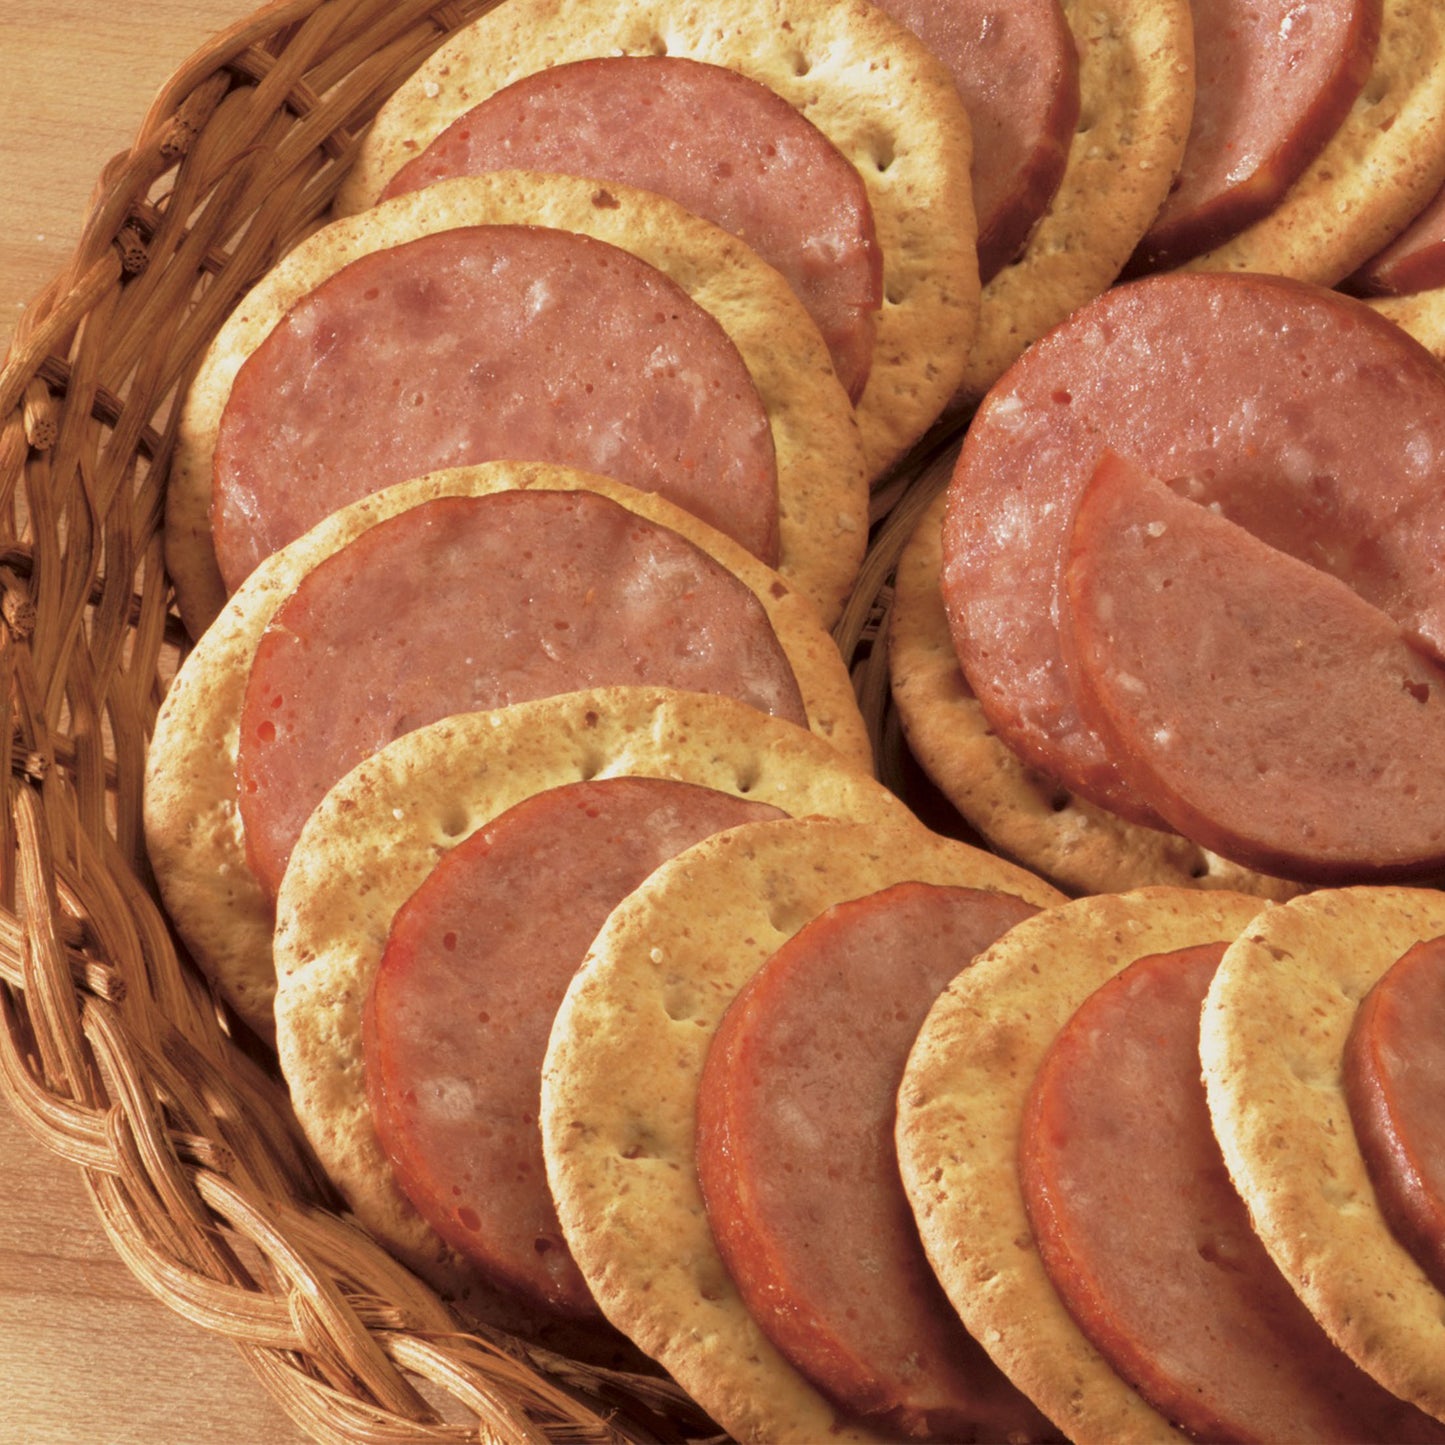 Summer Sausage, Pork and Beef 12oz (6-packages)